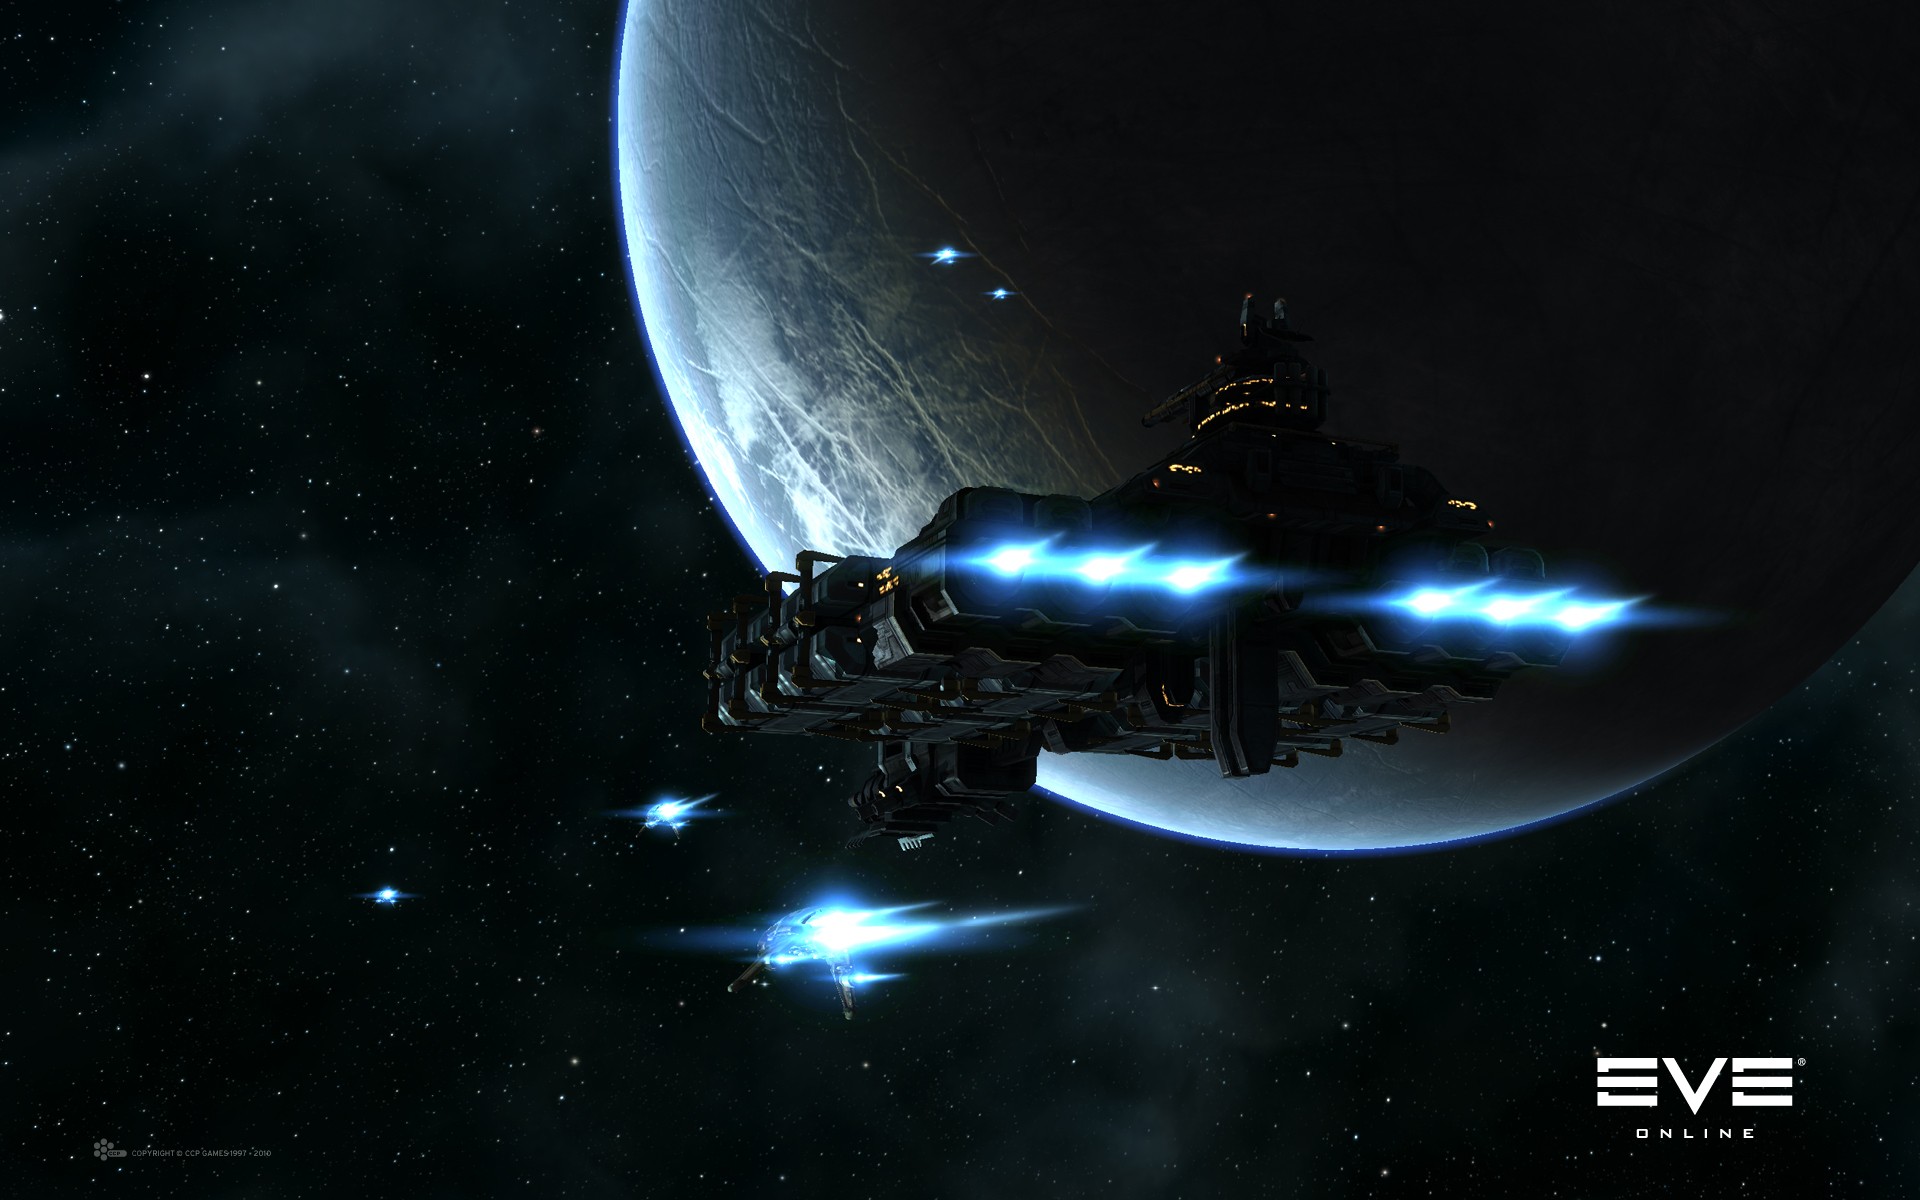 General 1920x1200 EVE Online space spaceship PC gaming planet vehicle science fiction digital art logo video games